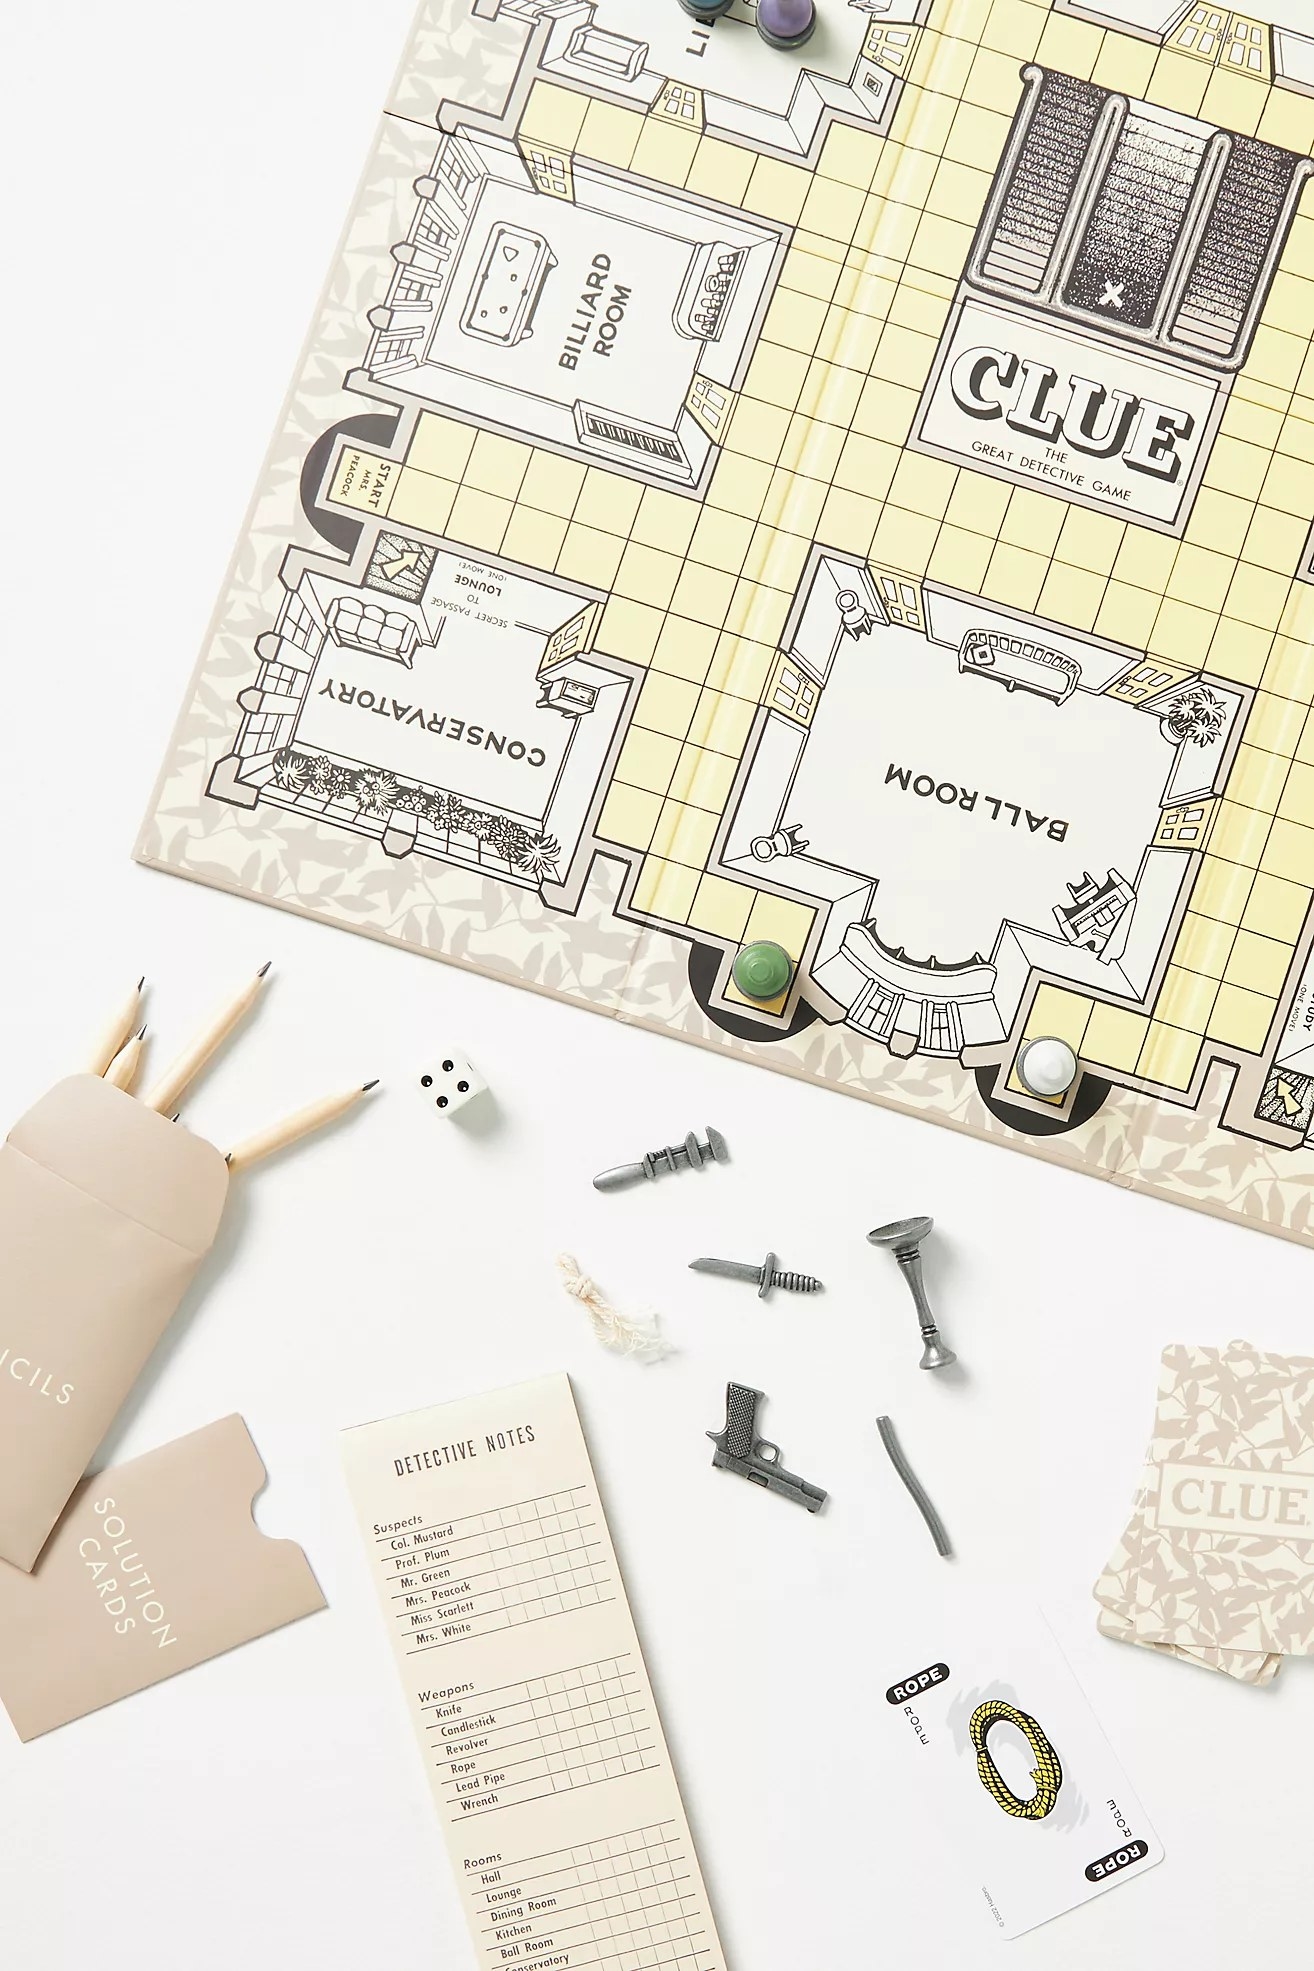 the vintage Clue game board and pieces